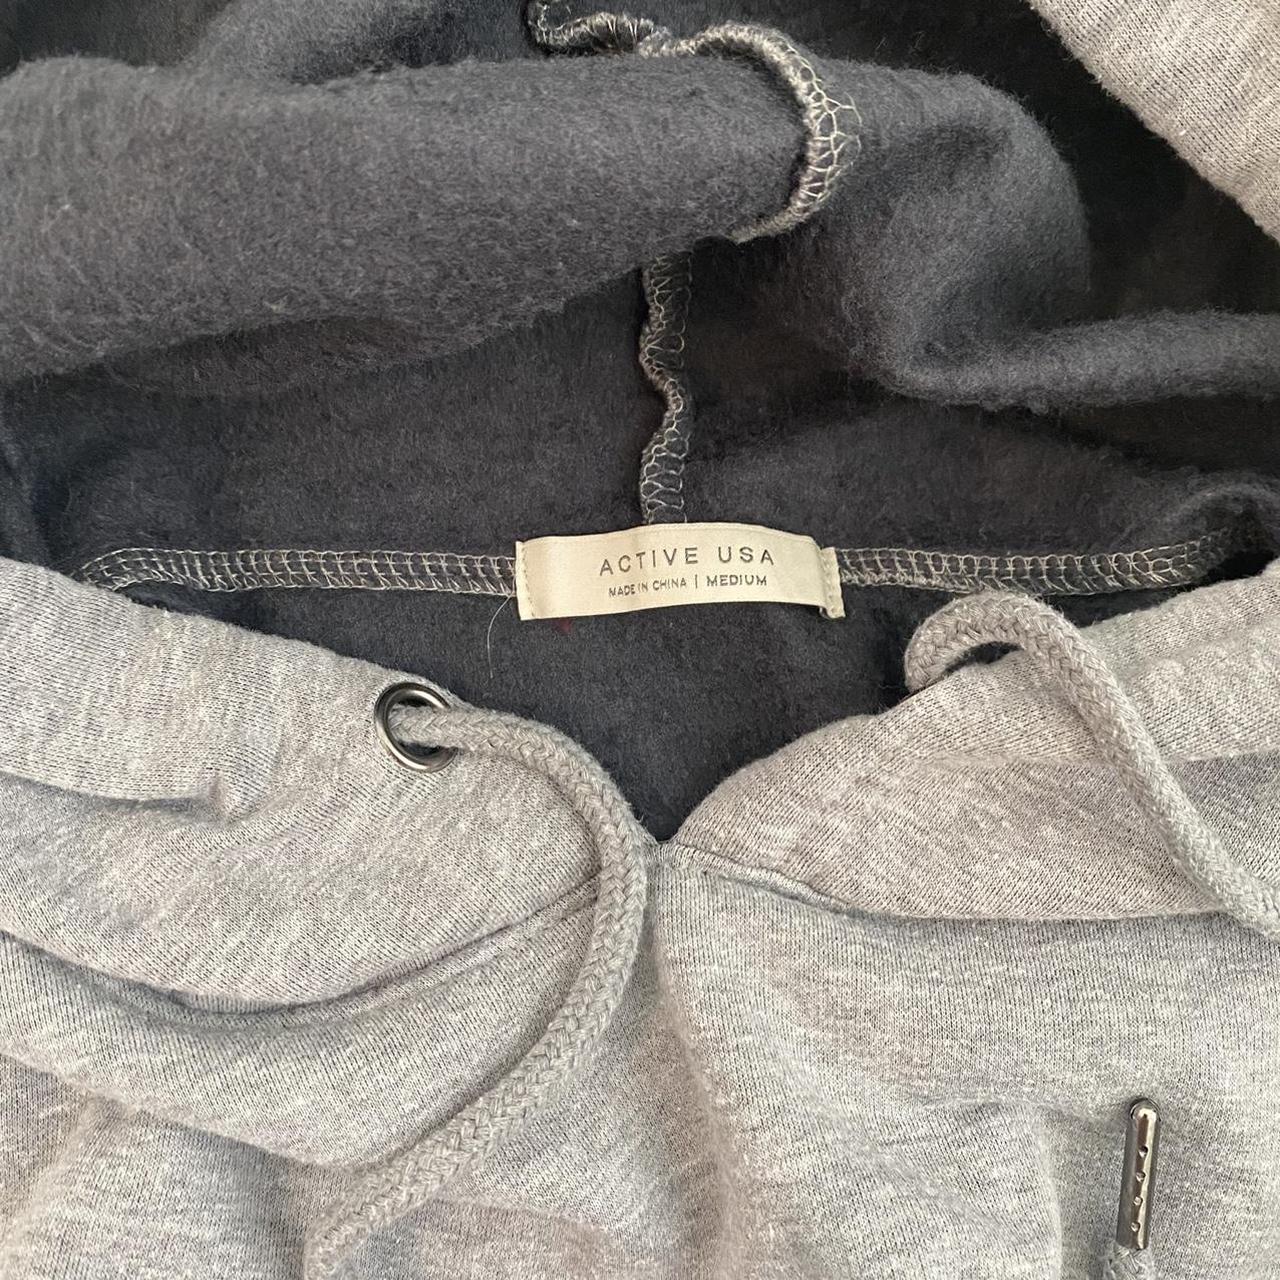 Product Image 3 - oversized grey hoodie dress

tag says